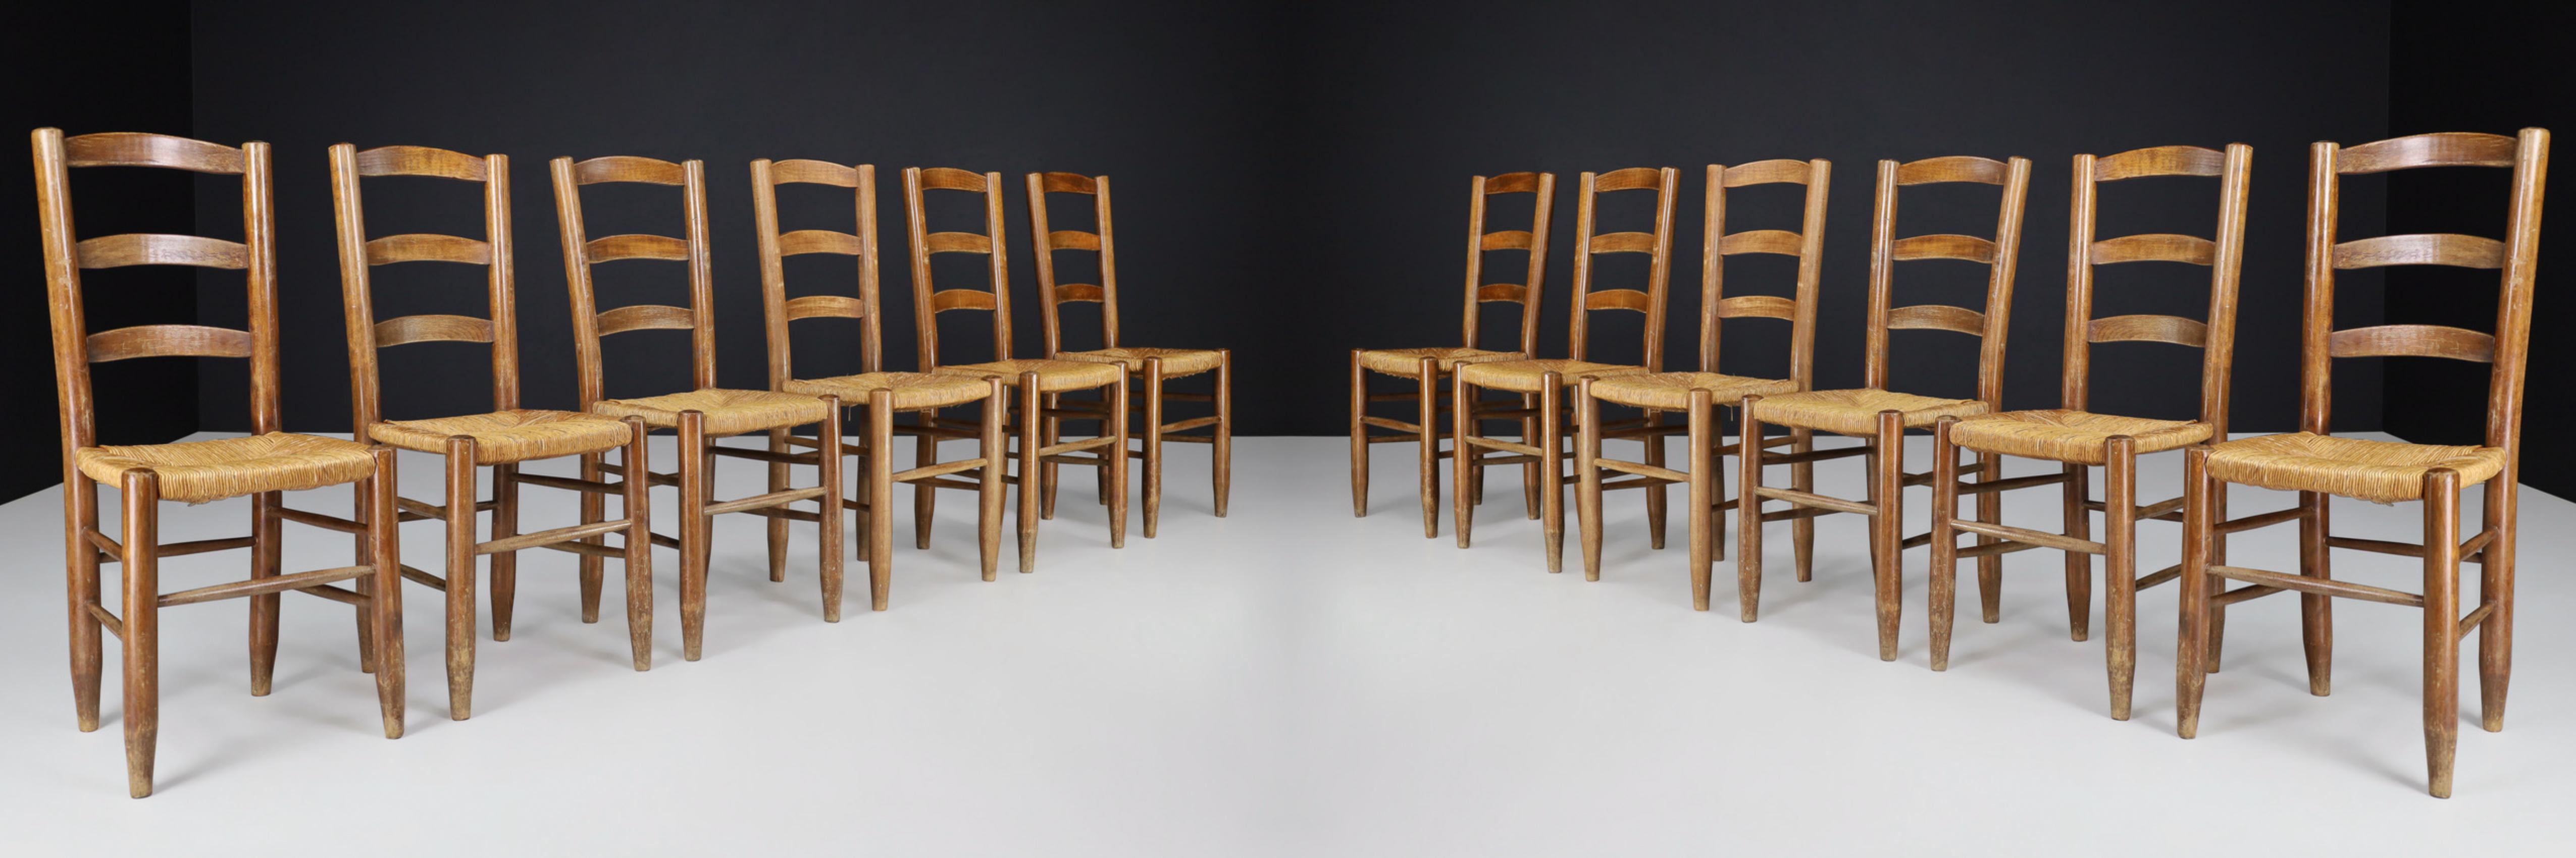 Charlotte Perriand Style Dining Chairs, France 1950s.

These solid beech and rush dining chairs show a lovely natural patina and are in excellent original condition. These chairs would be an eye-catching addition to any interior, such as a dining